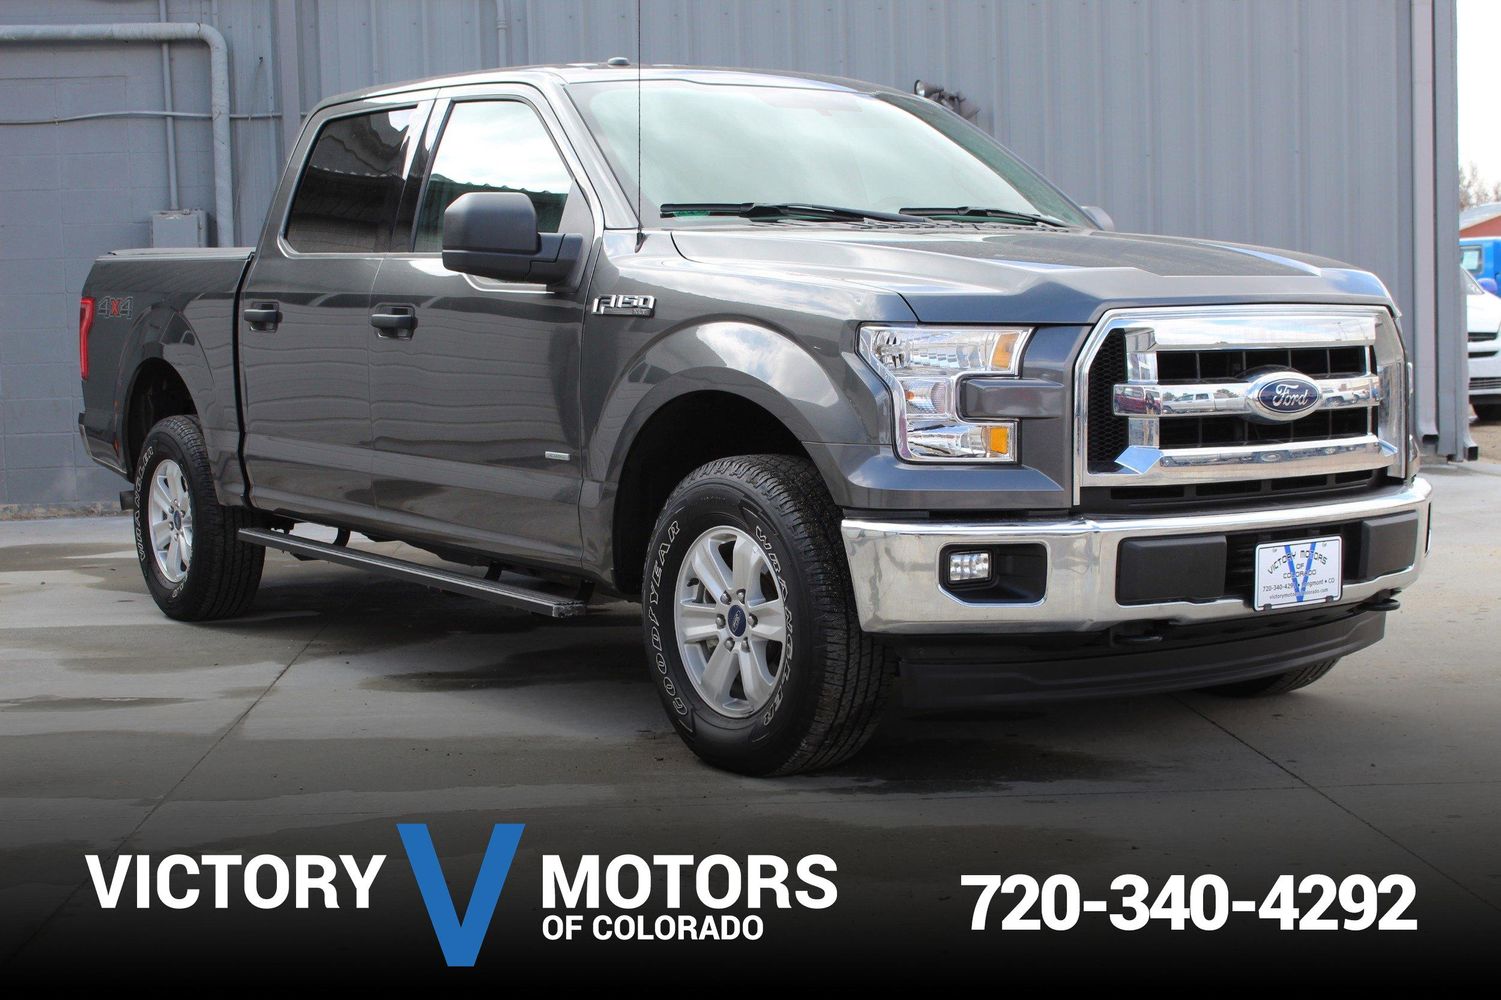 2017 Ford F-150 XLT | Victory Motors of Colorado 2017 Ford F 150 Xlt Supercrew Towing Capacity